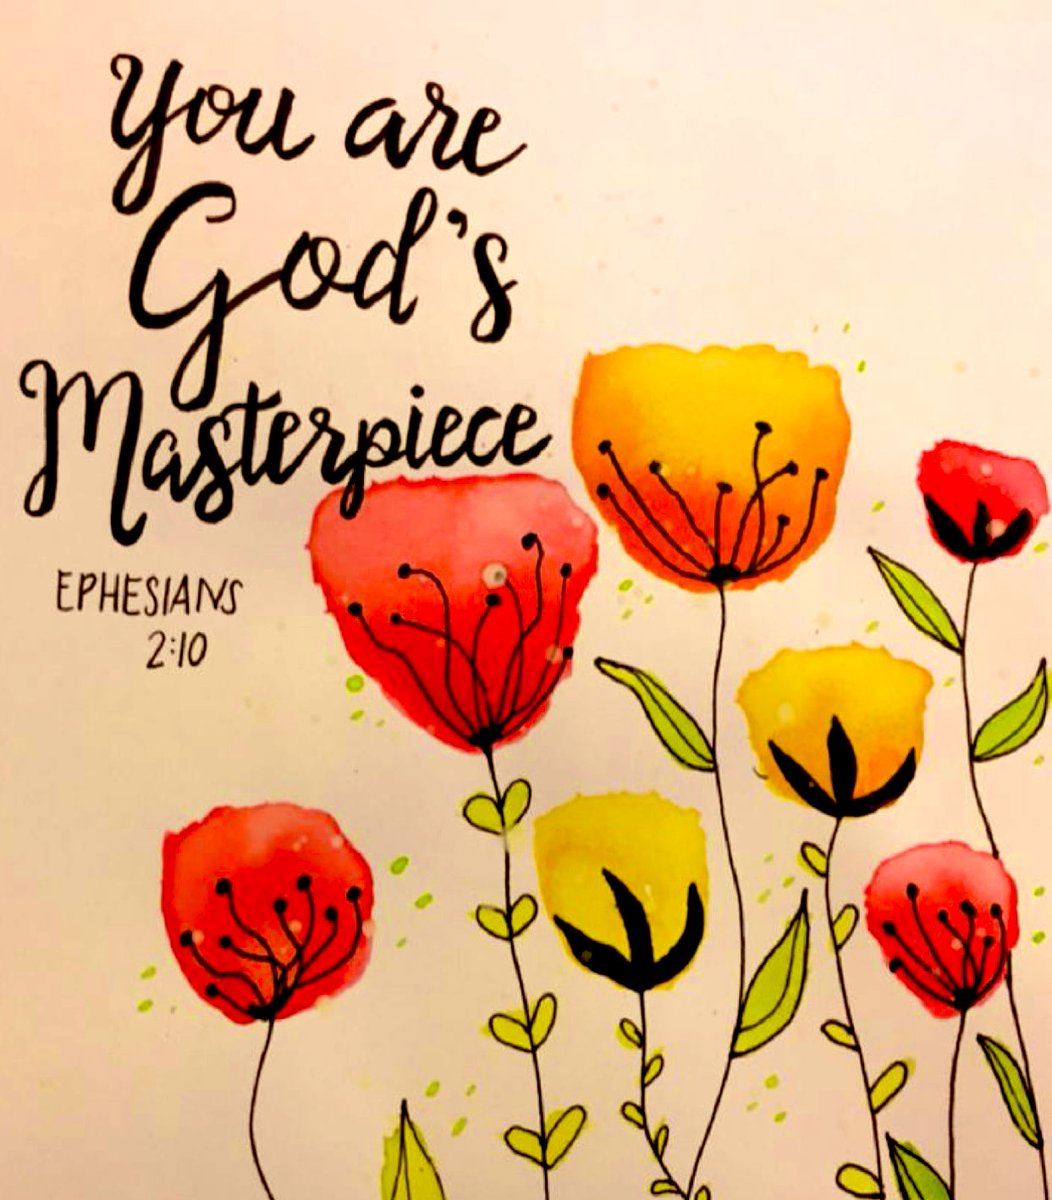 “Thank You Lord for choosing me.” I found myself saying this outloud today Do you have trouble accepting God's love because of #FeelingsOfInferiority? God sees you as His Masterpiece Don't let your feelings block this Truth He Choose you. Accept His Love. ~forever~